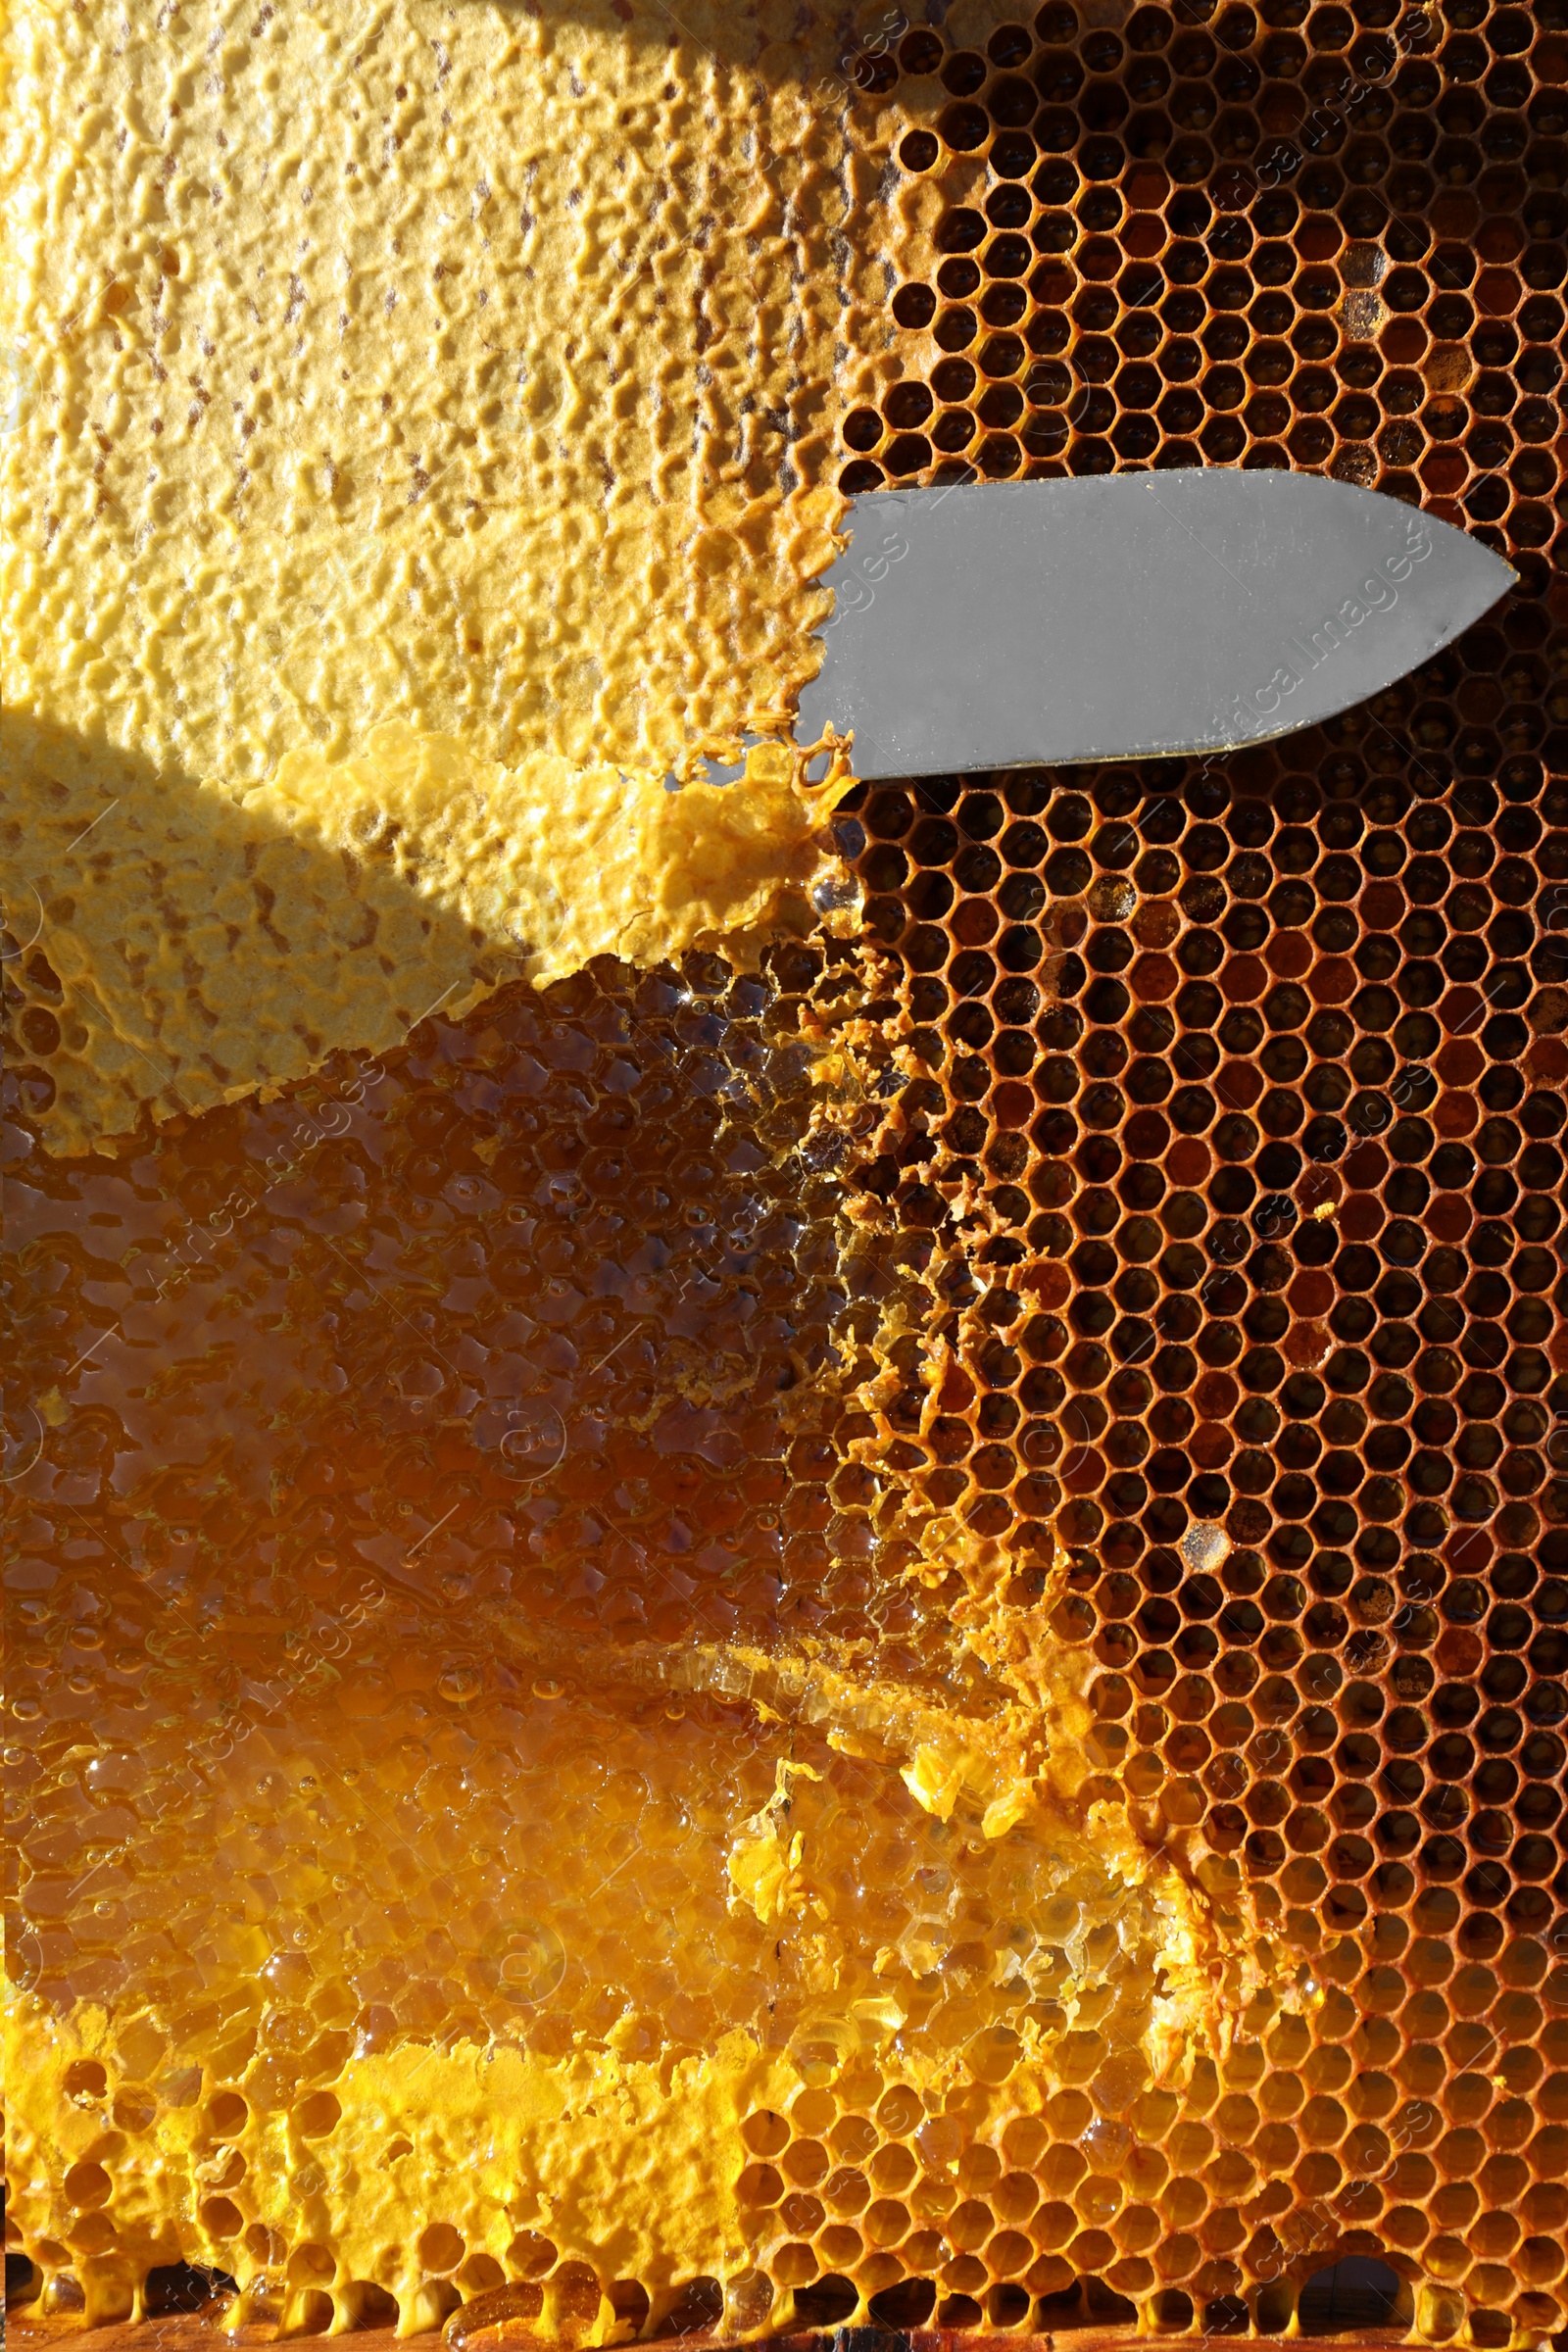 Photo of Uncapping honey cells with knife, closeup view